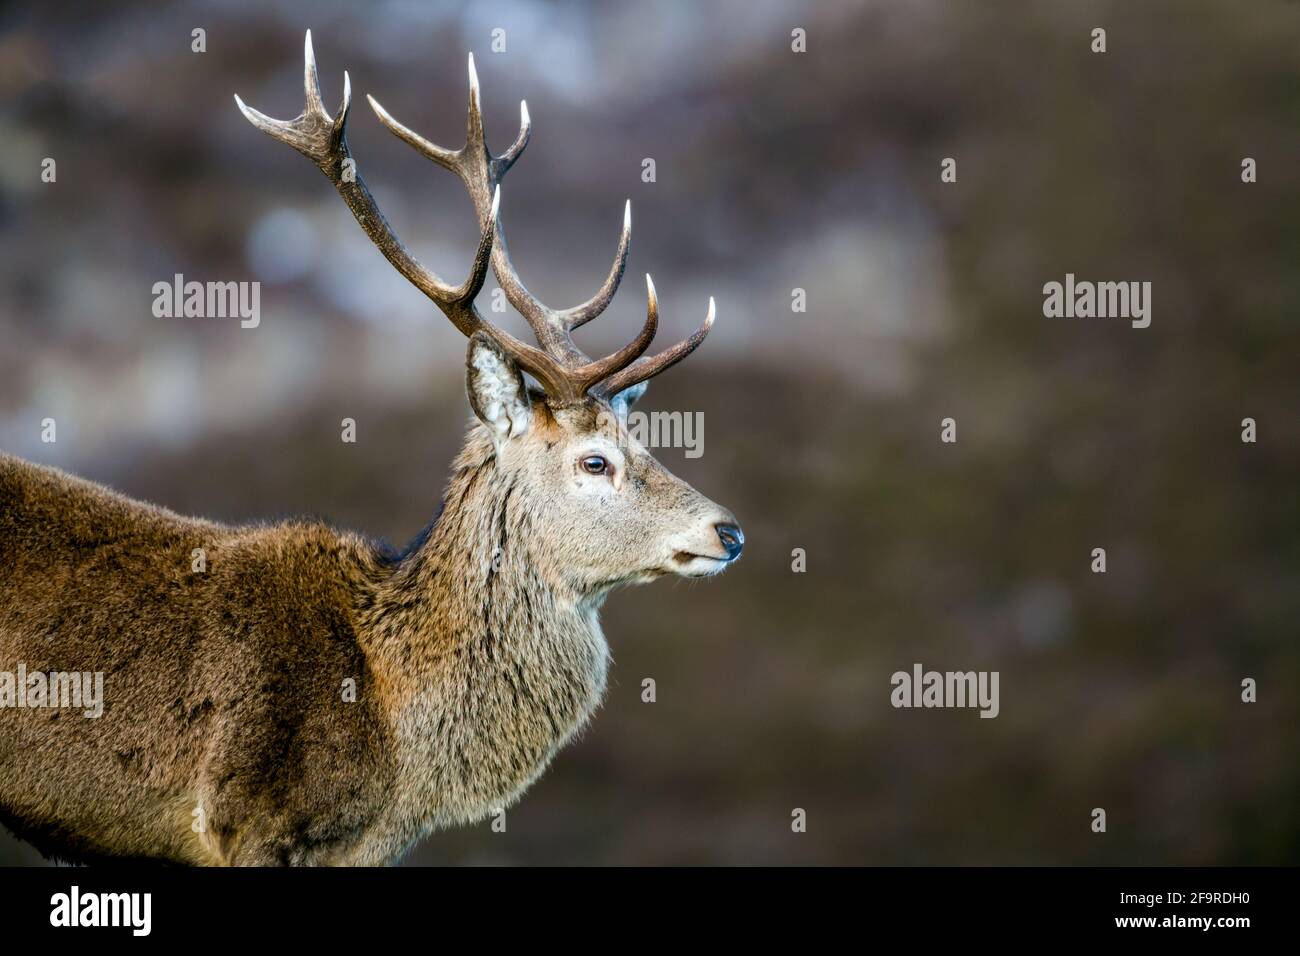 Male Red deer Cervus elaphus stags in the Highlands of Scotland Stock Photo